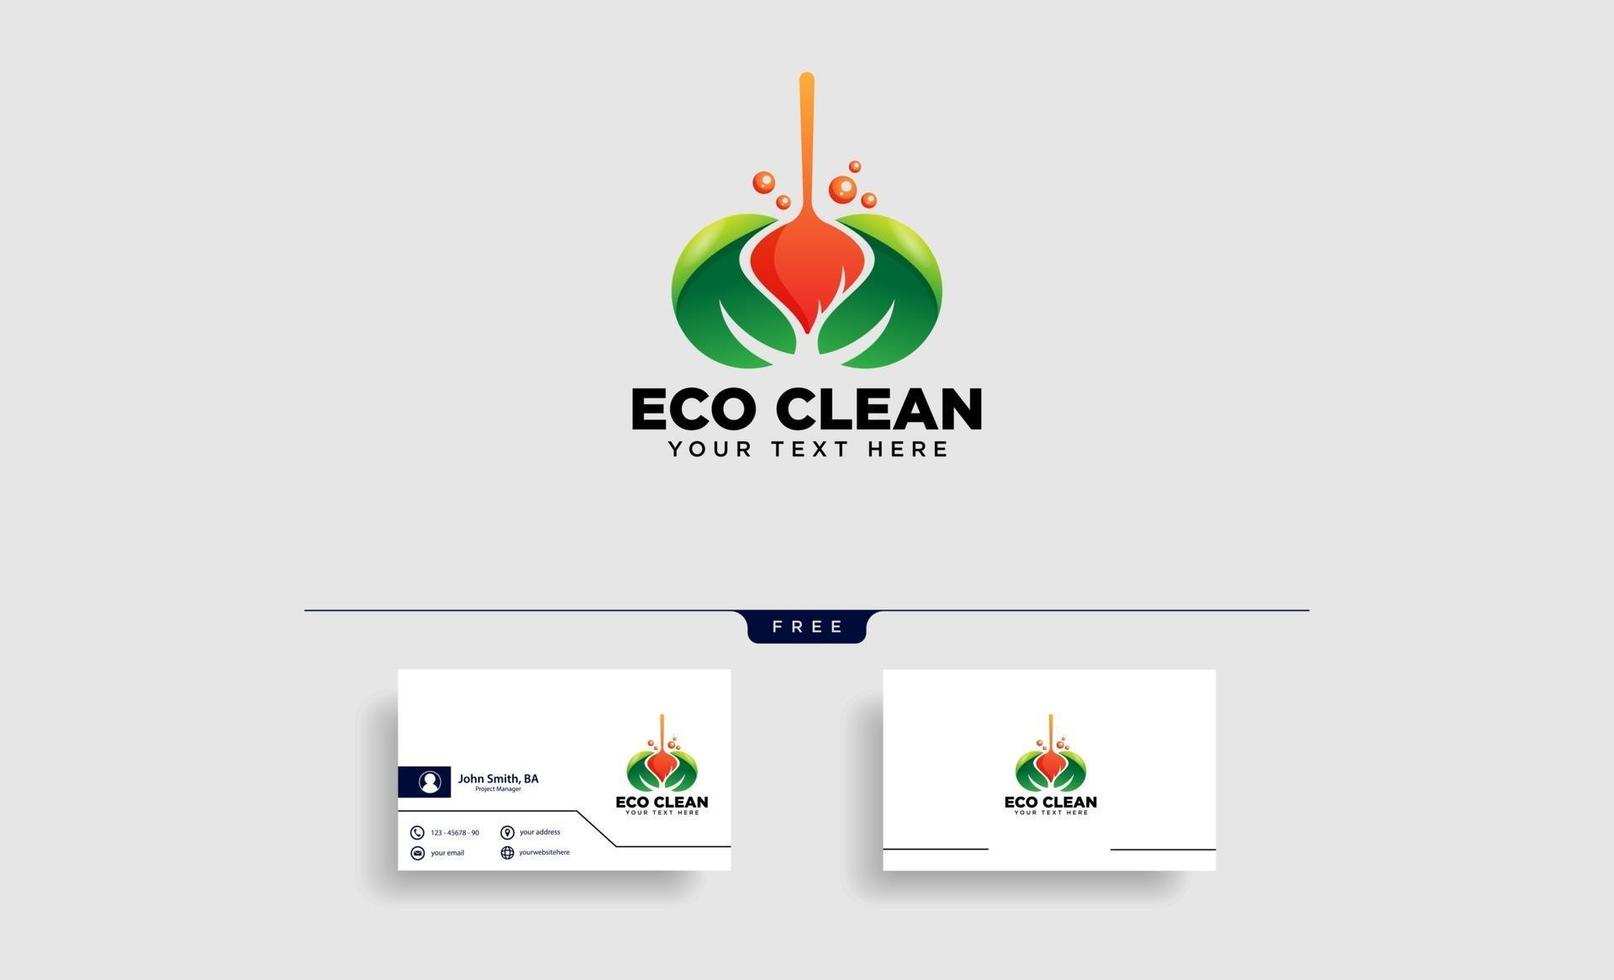 cleaning service house eco logo template vector illustration icon element isolated vector